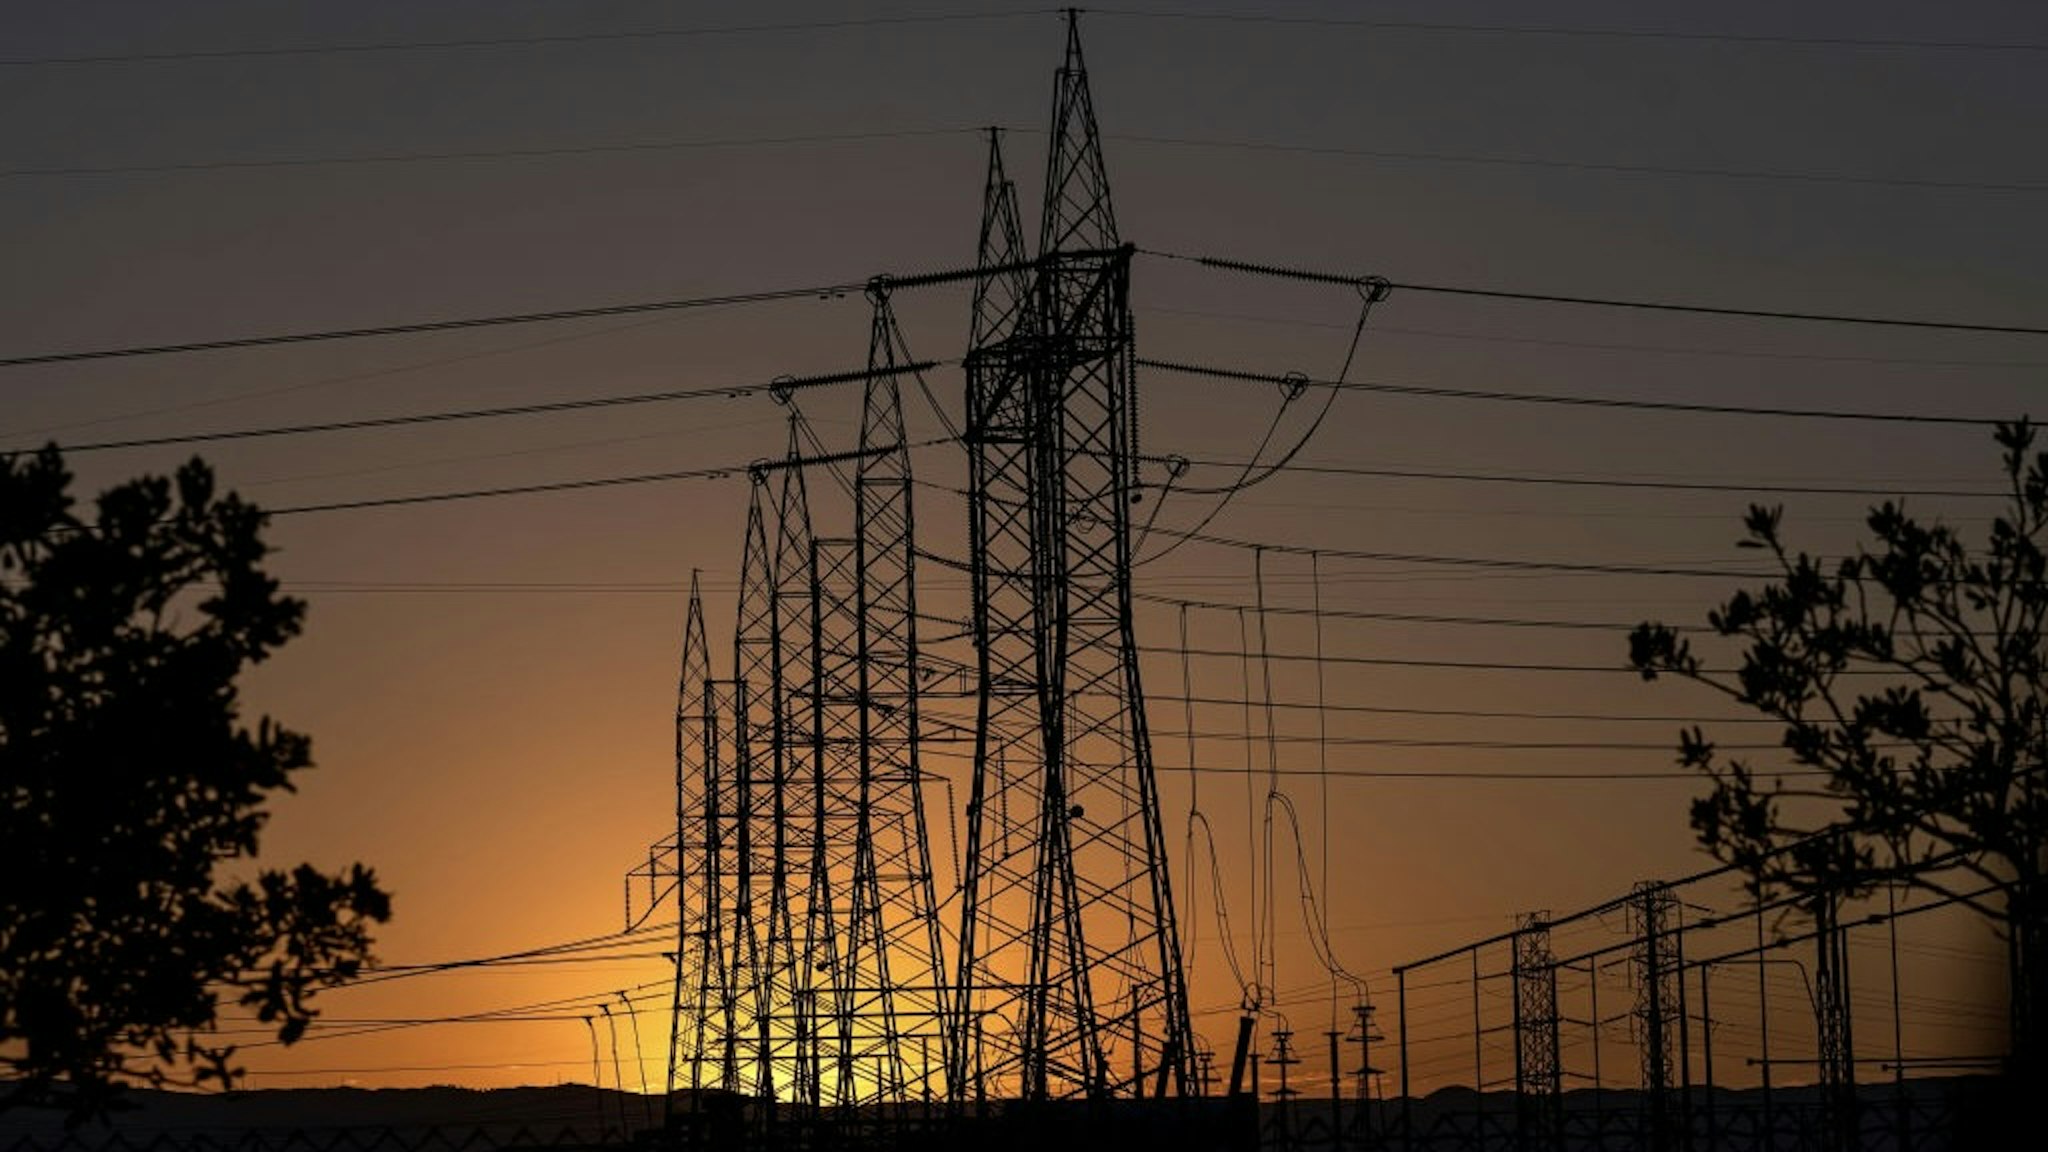 California Power Use To Hit Record During Heatwave Electrical transmission towers at a Pacific Gas and Electric (PG&E) electrical substation during a heatwave in Vacaville, California, US, on Tuesday, Sept. 6, 2022. California narrowly avoided blackouts for a second successive day even as blistering temperatures pushed electricity demand to a record and stretched the state's power grid close to its limits. Photographer: David Paul Morris/Bloomberg via Getty Images Bloomberg / Contributor